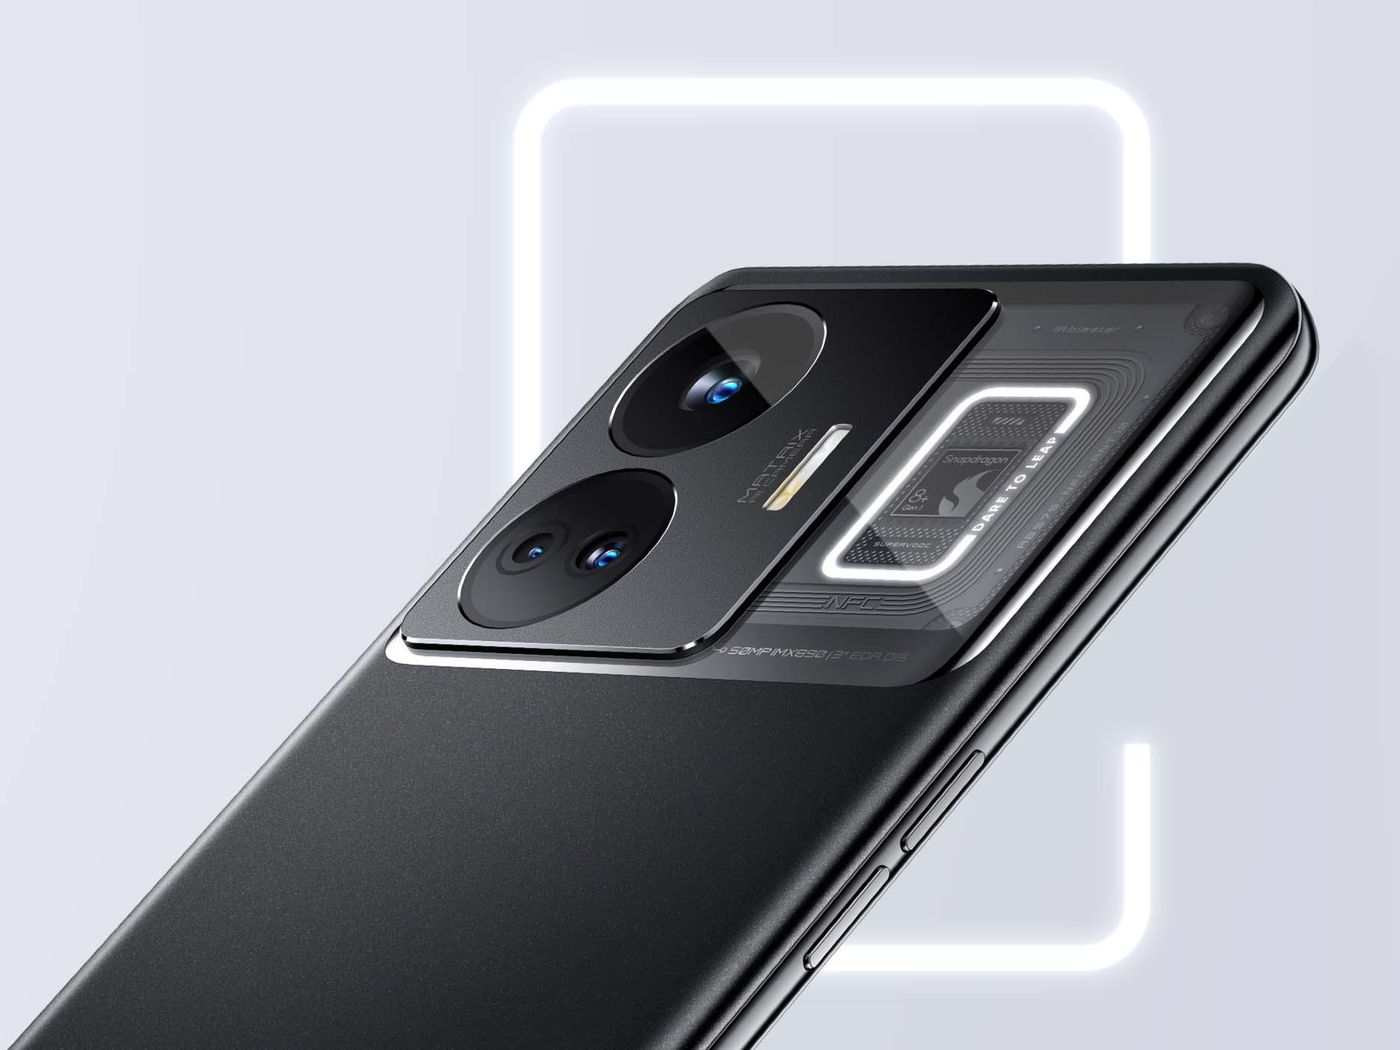 Realme’s ridiculous 240W fast-charging phone